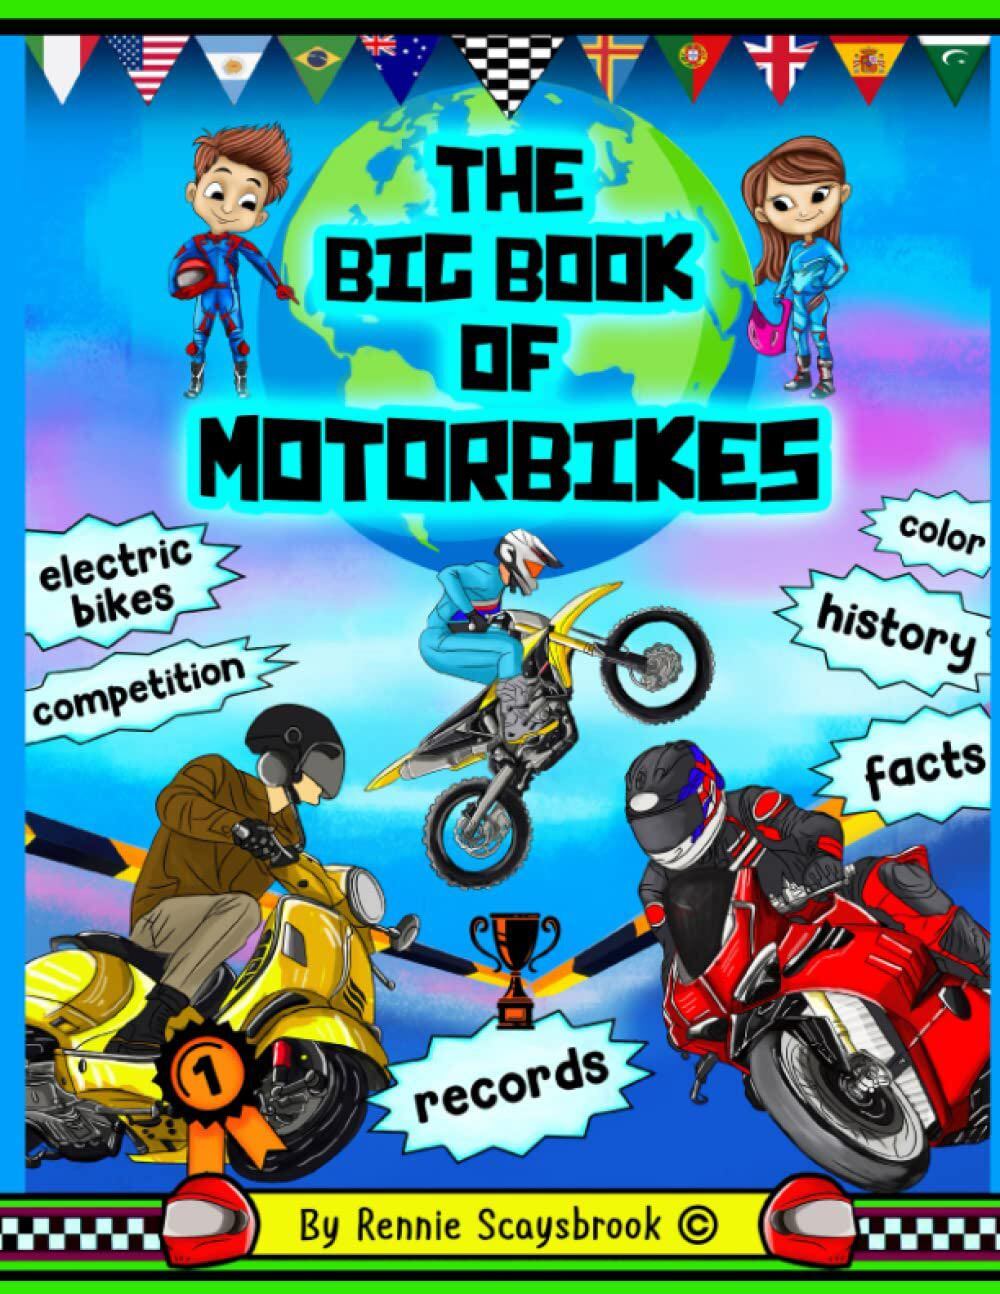 A great option for kids—<i>The Big Book of Motorbikes</i> by Rennie Scaysbrook.